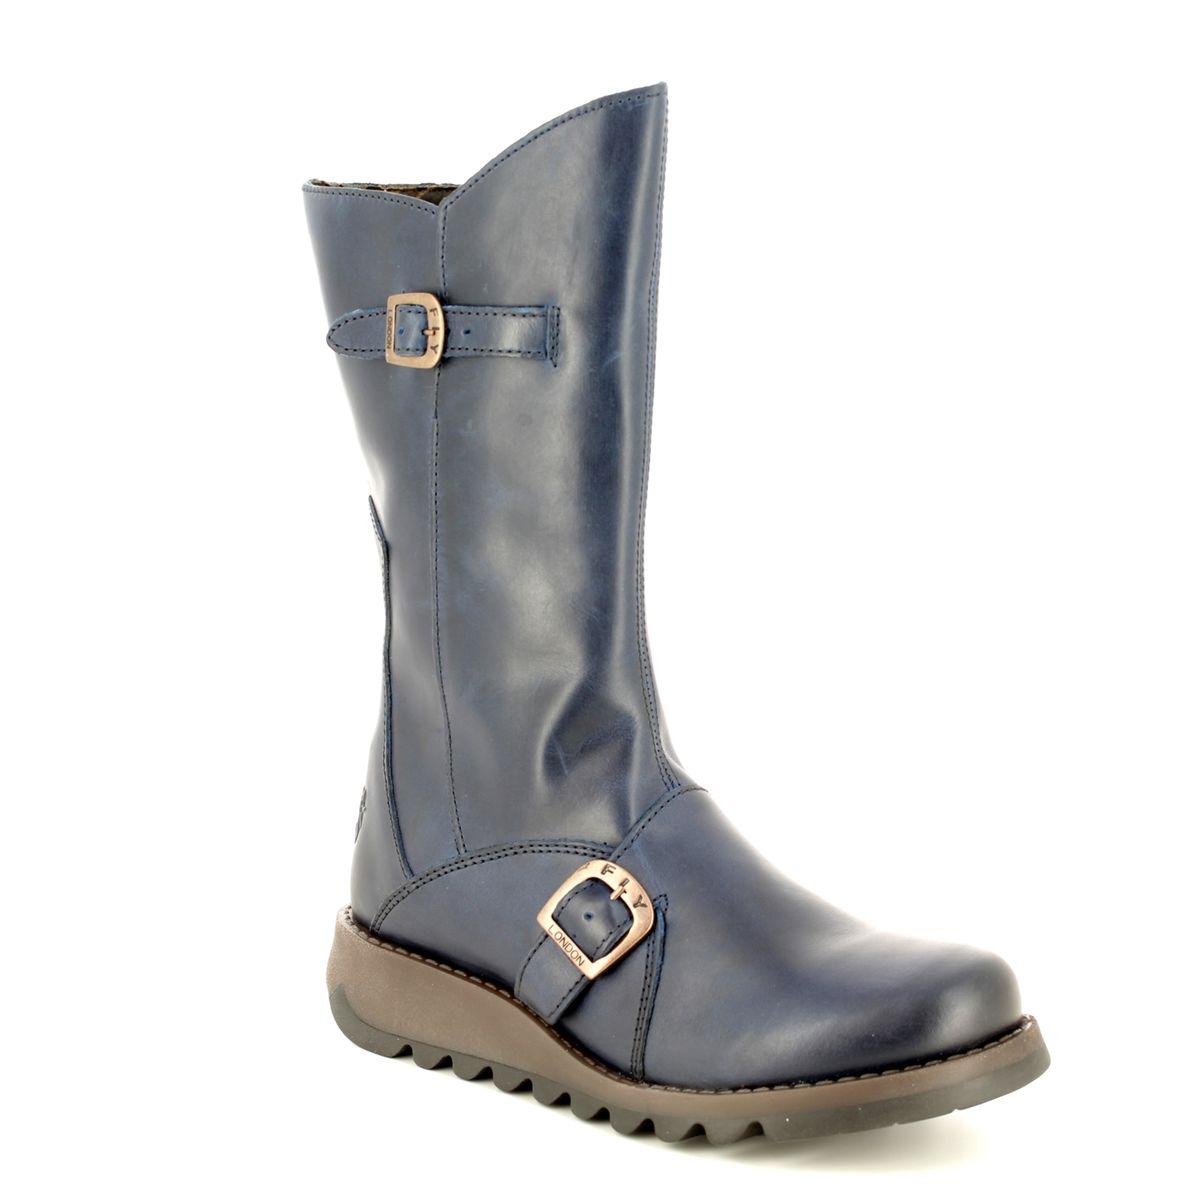 blue fly london boots